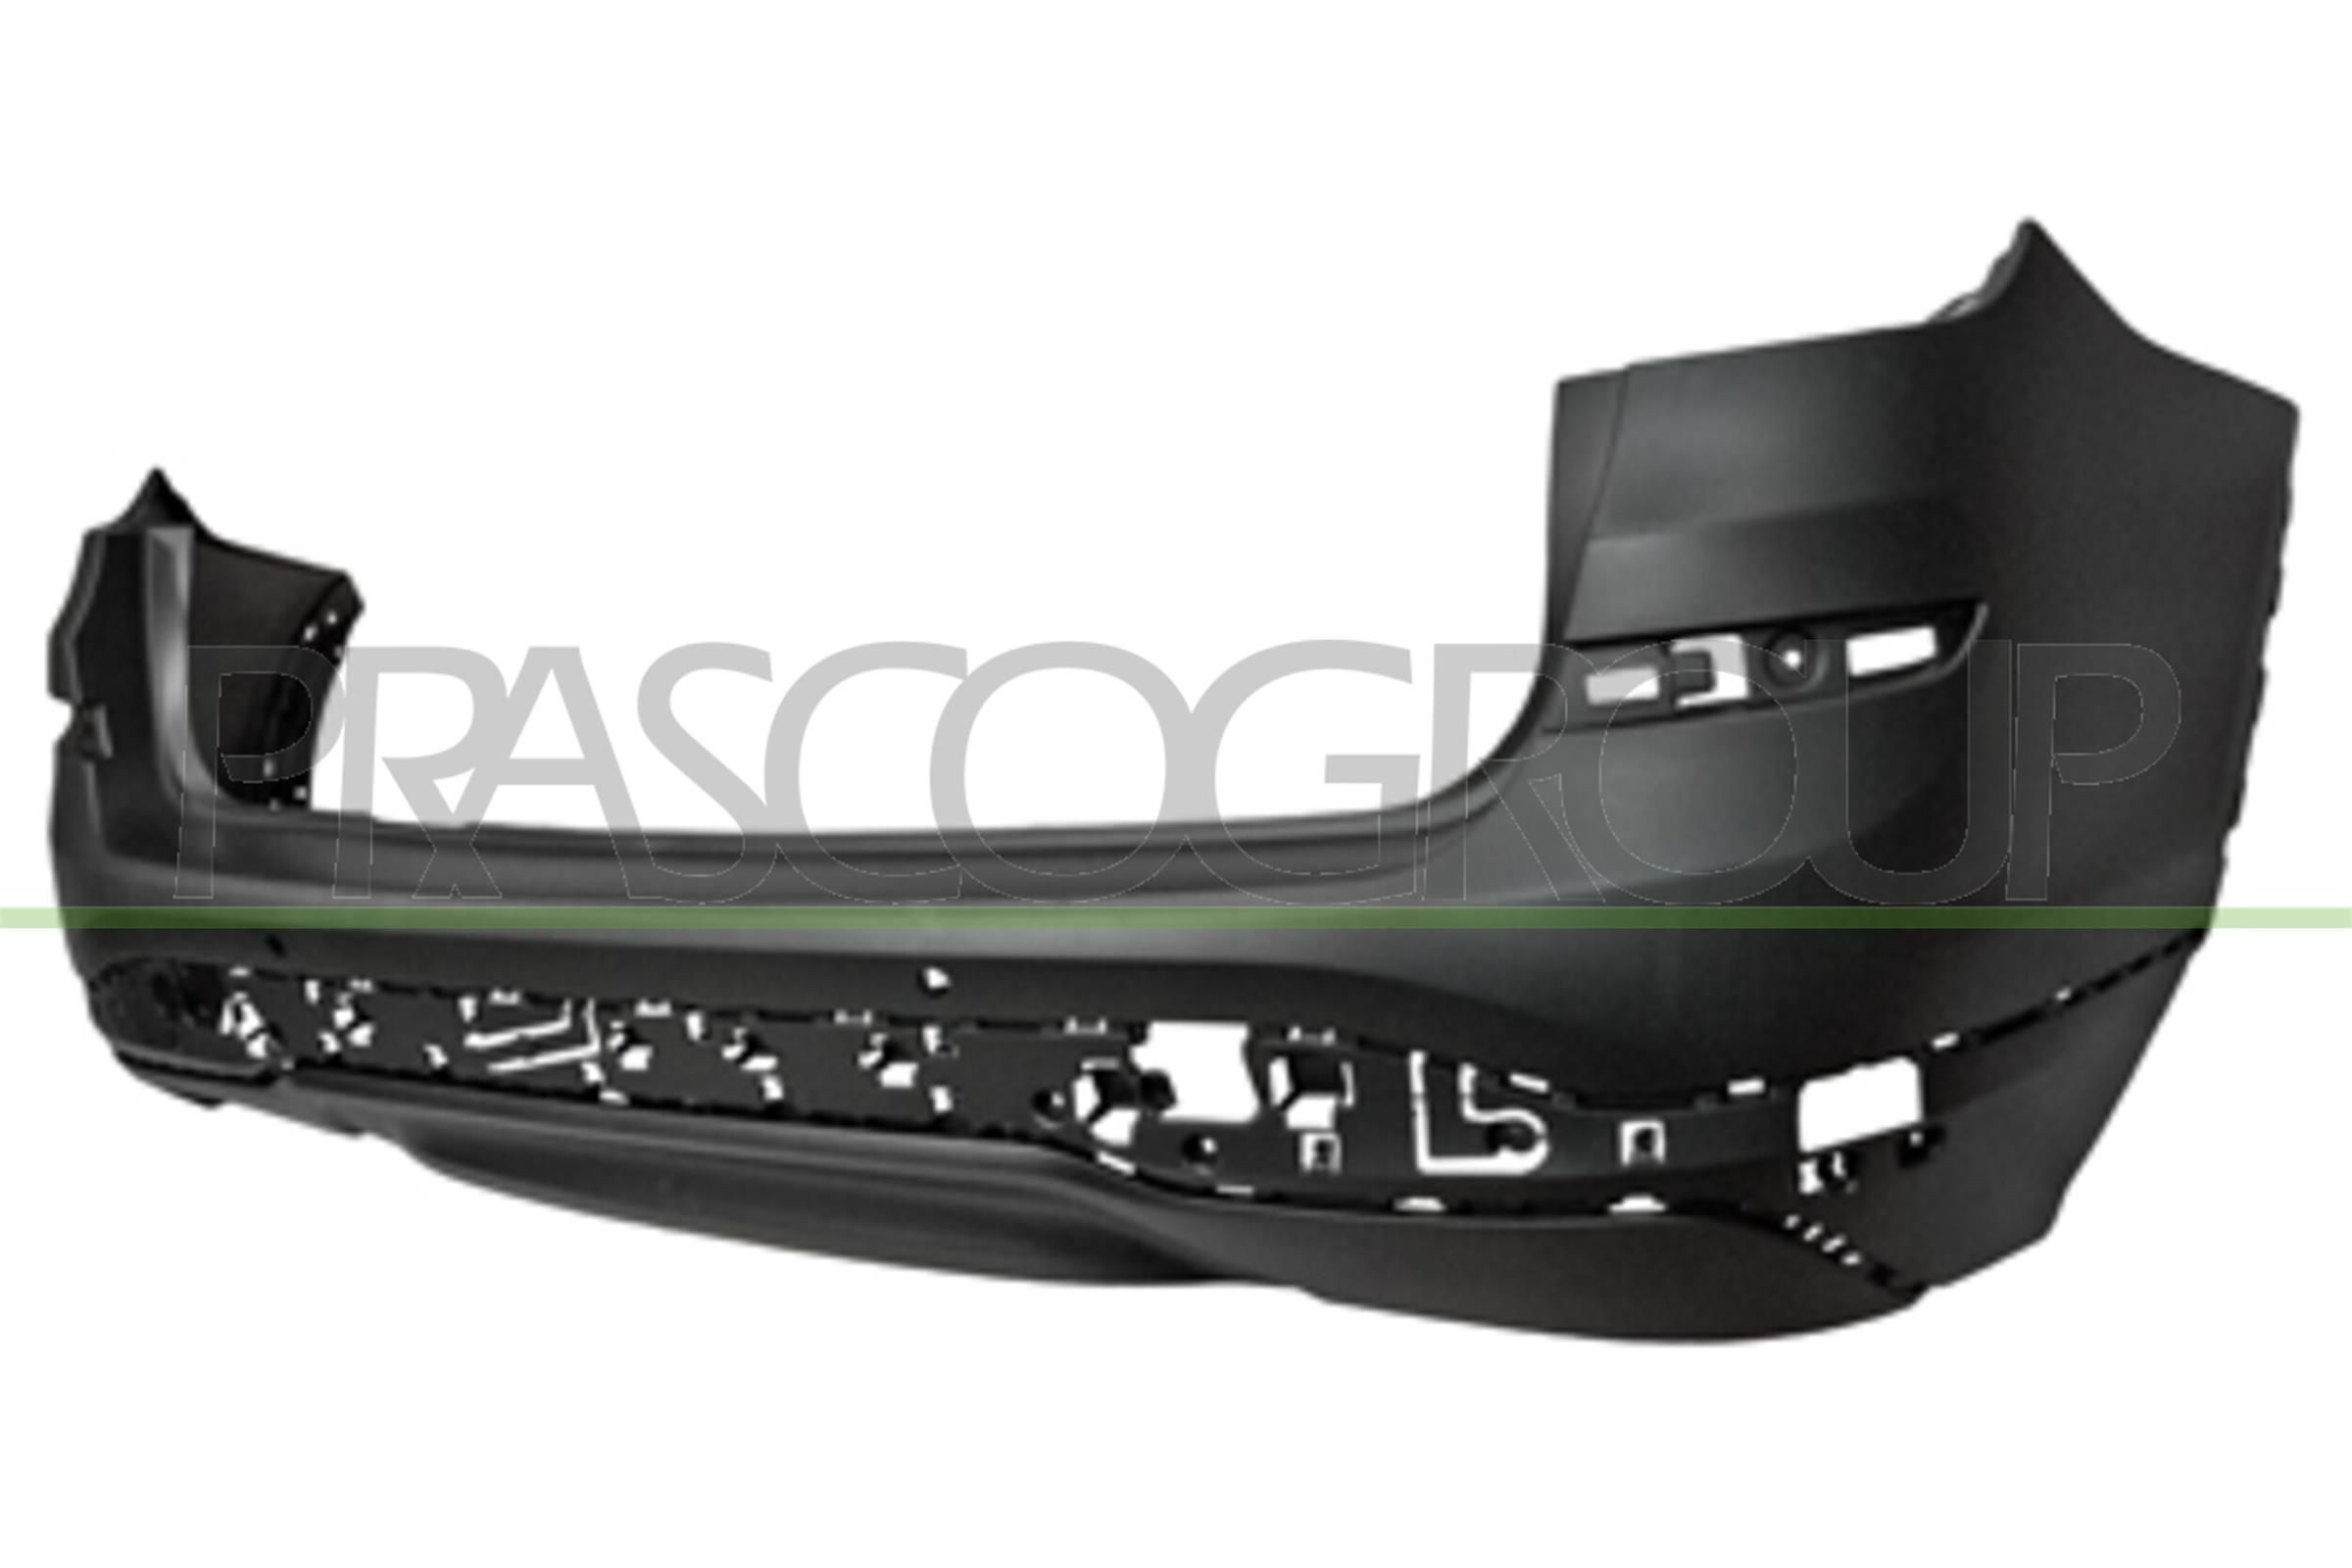 PRASCO Bumpers rear and front BMW X3 (F25) new BM8061061